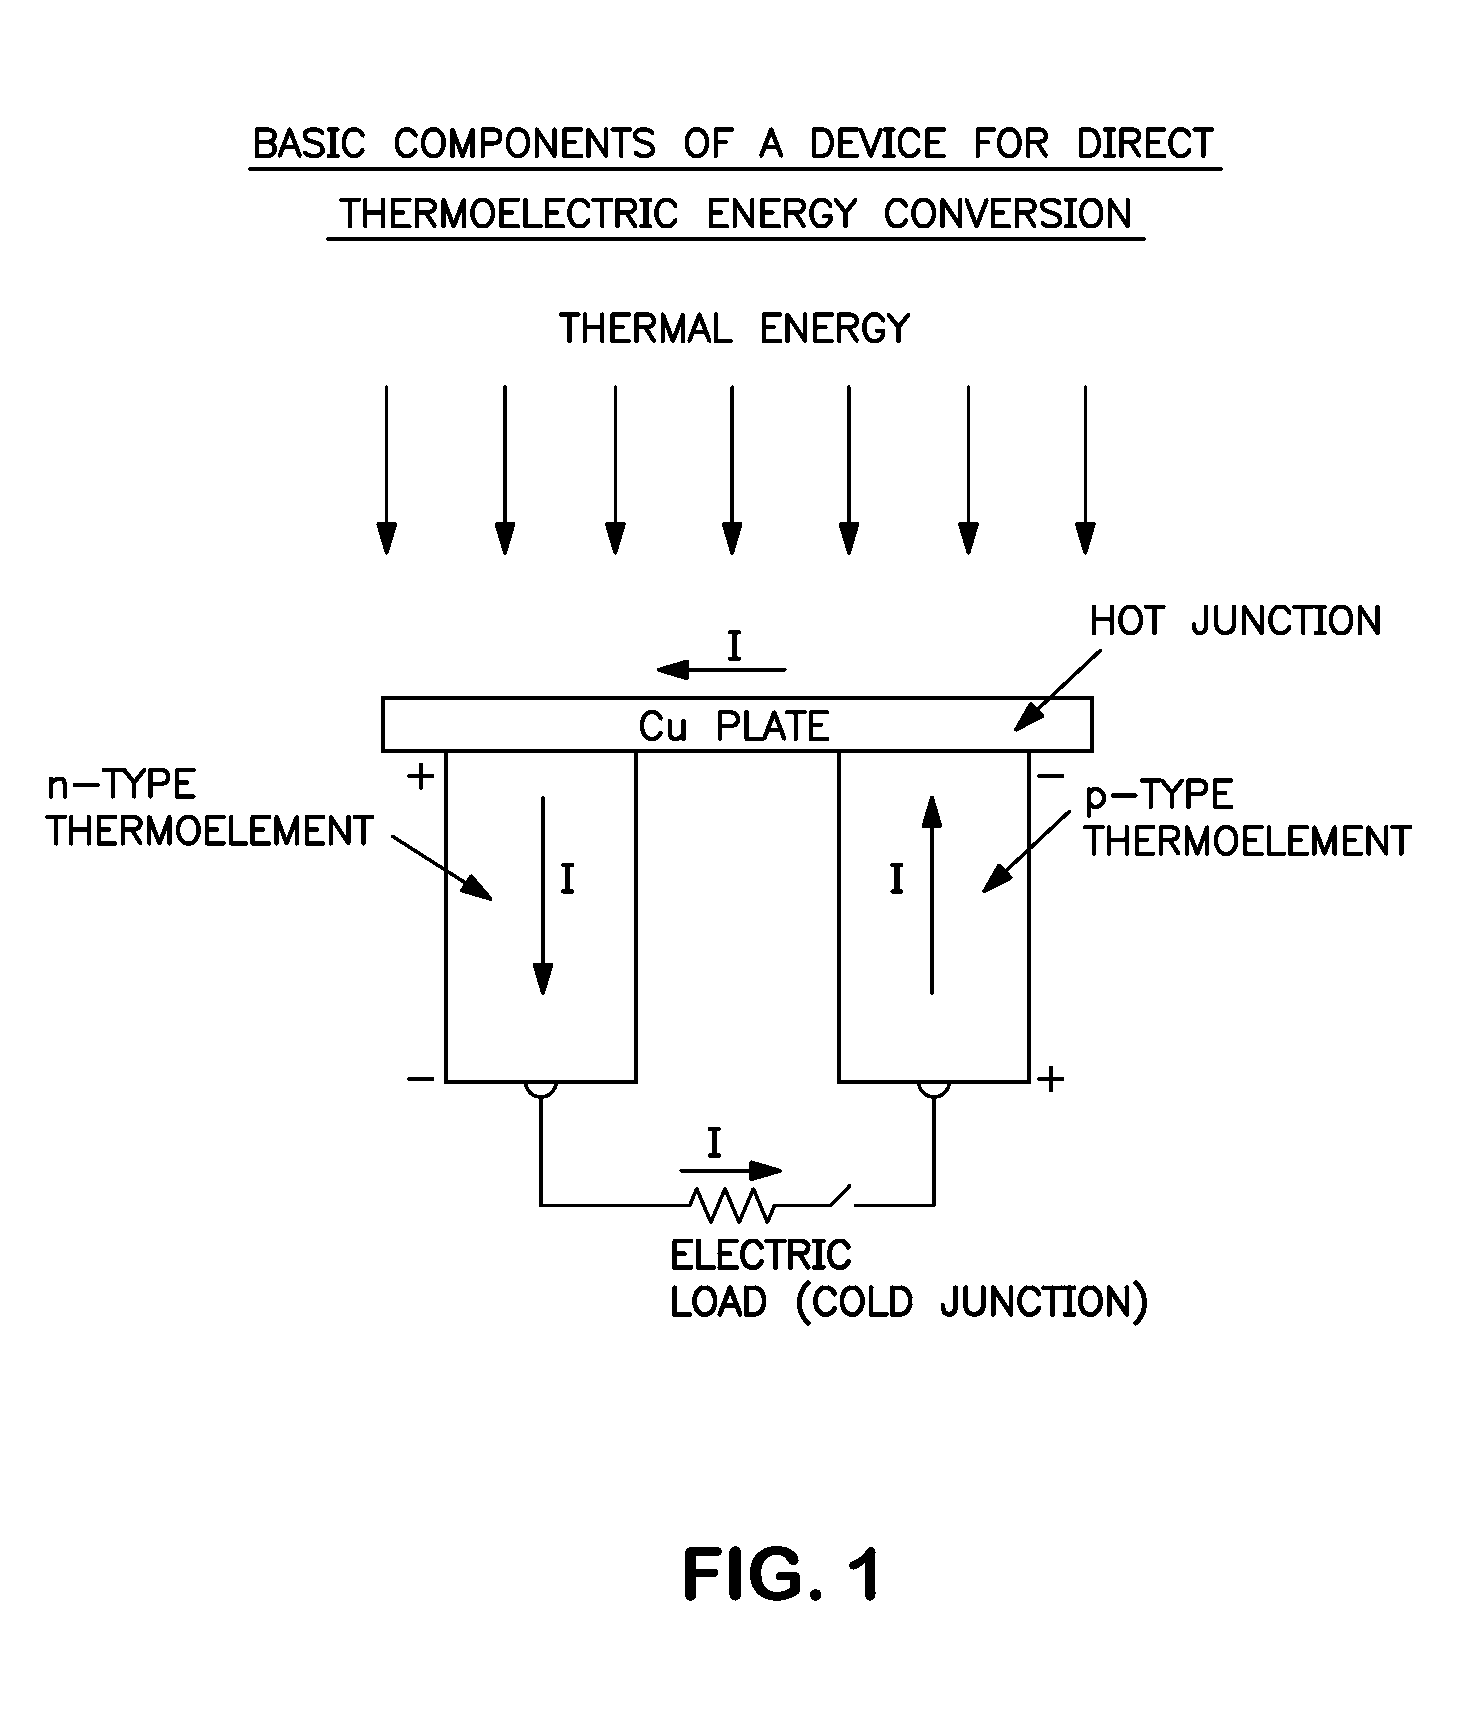 Method for producing a device for direct thermoelectric energy conversion